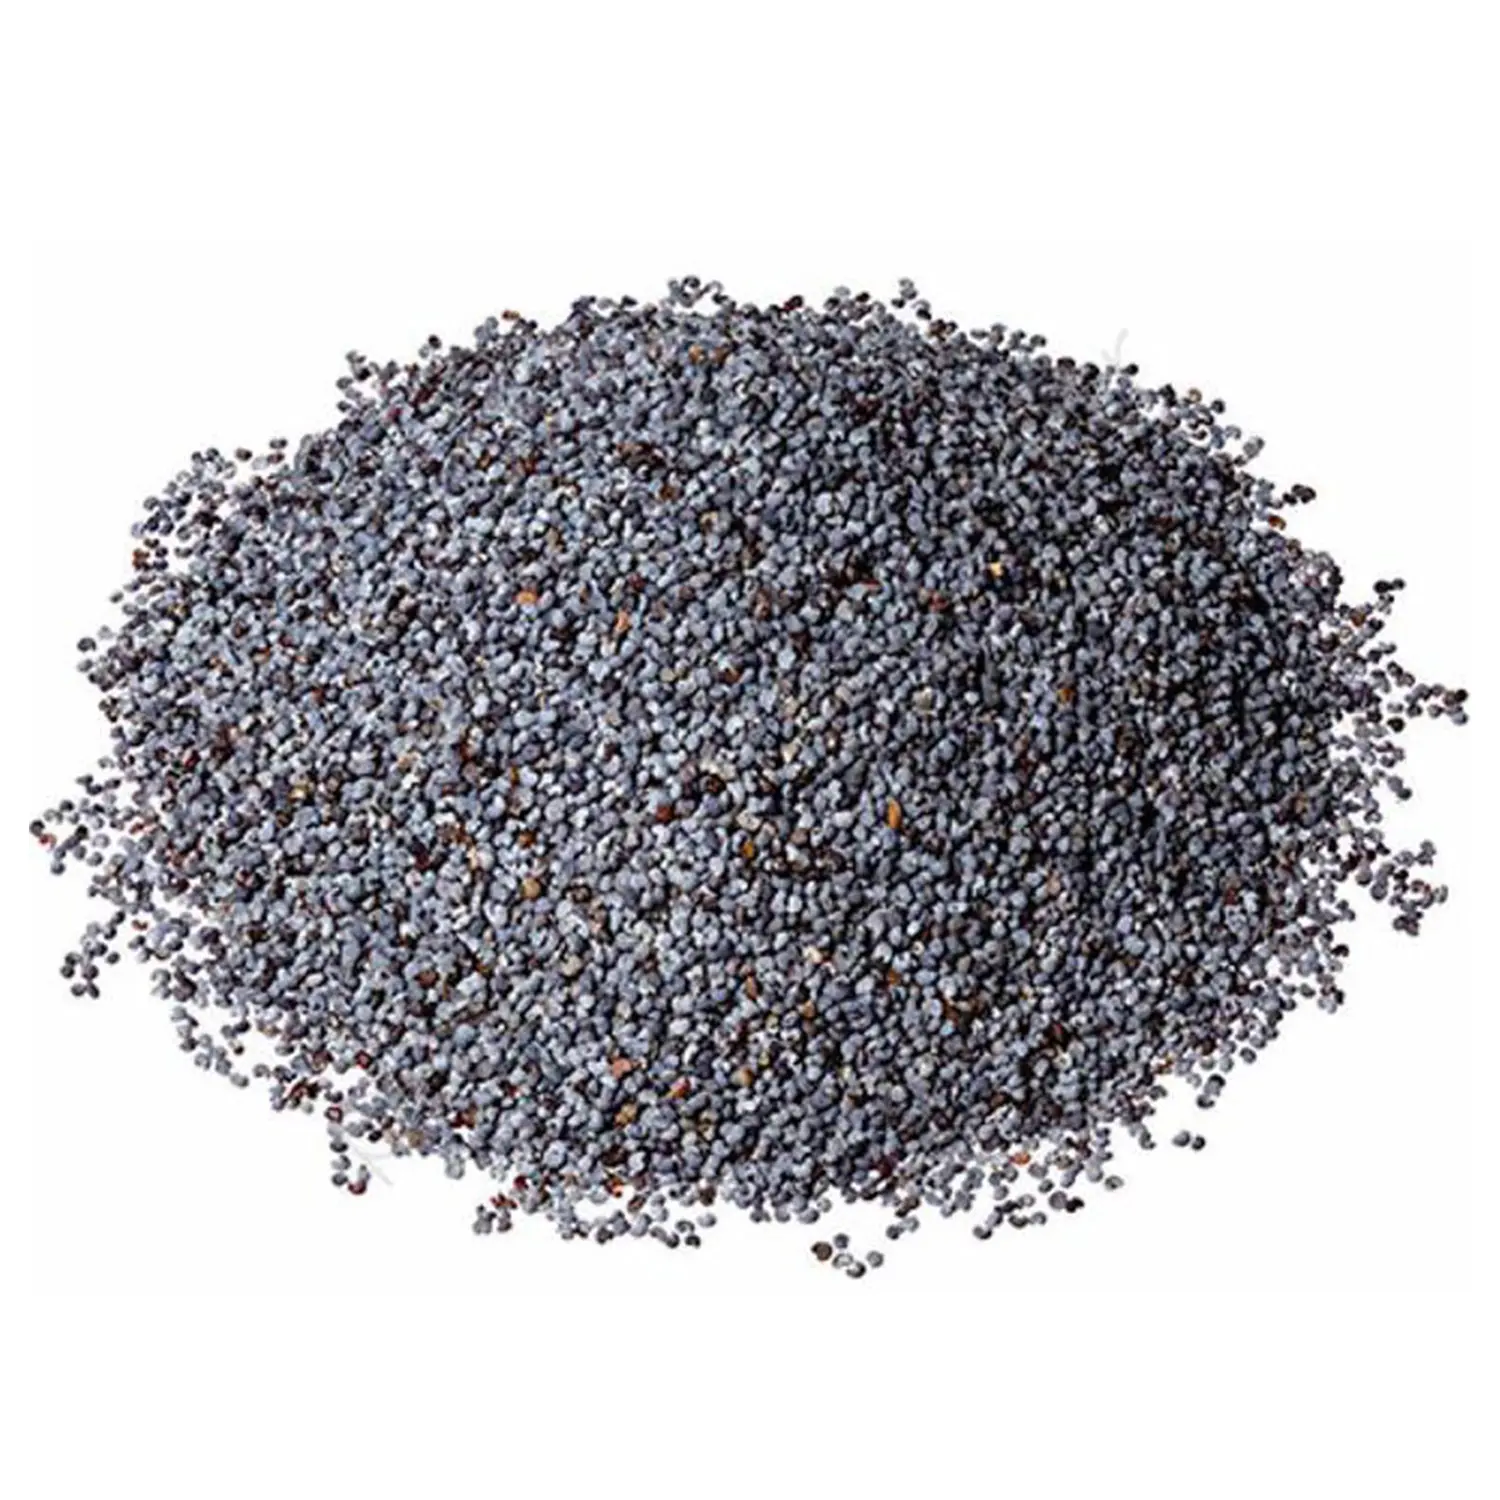 High Quality Unwashed Blue Poppy Seeds and Poppy Flower from Turkey